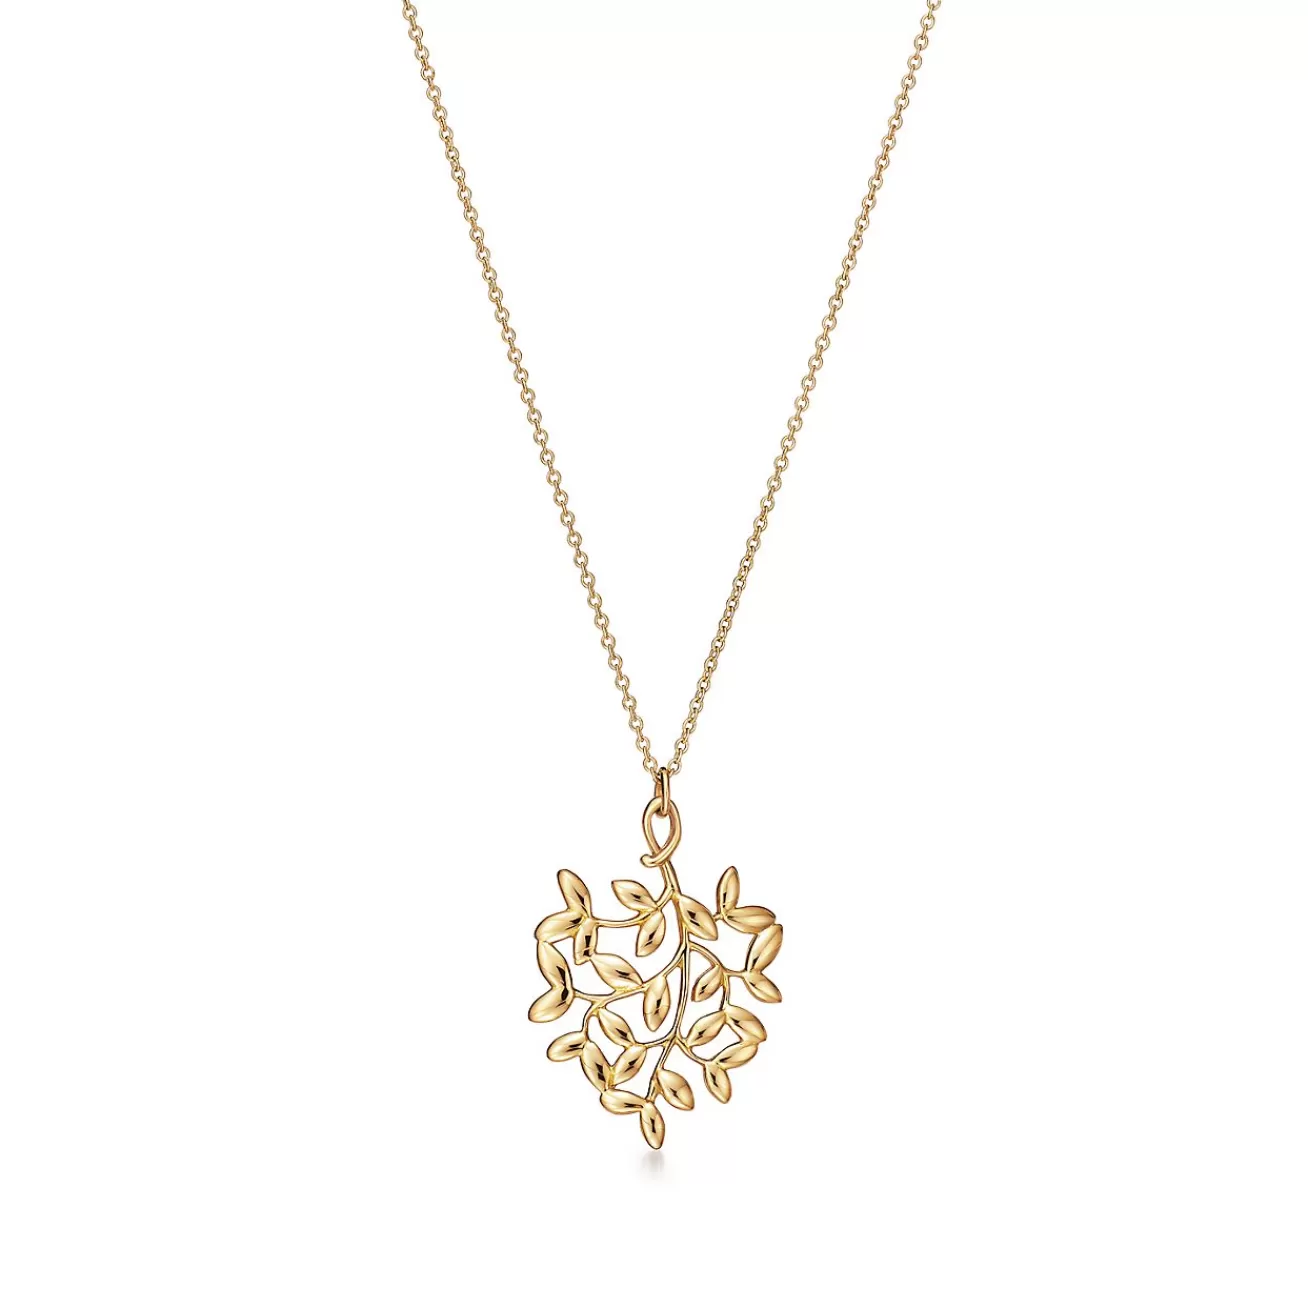 Tiffany & Co. Paloma Picasso® Olive Leaf pendant in 18k gold, small. | ^ Necklaces & Pendants | Gold Jewelry